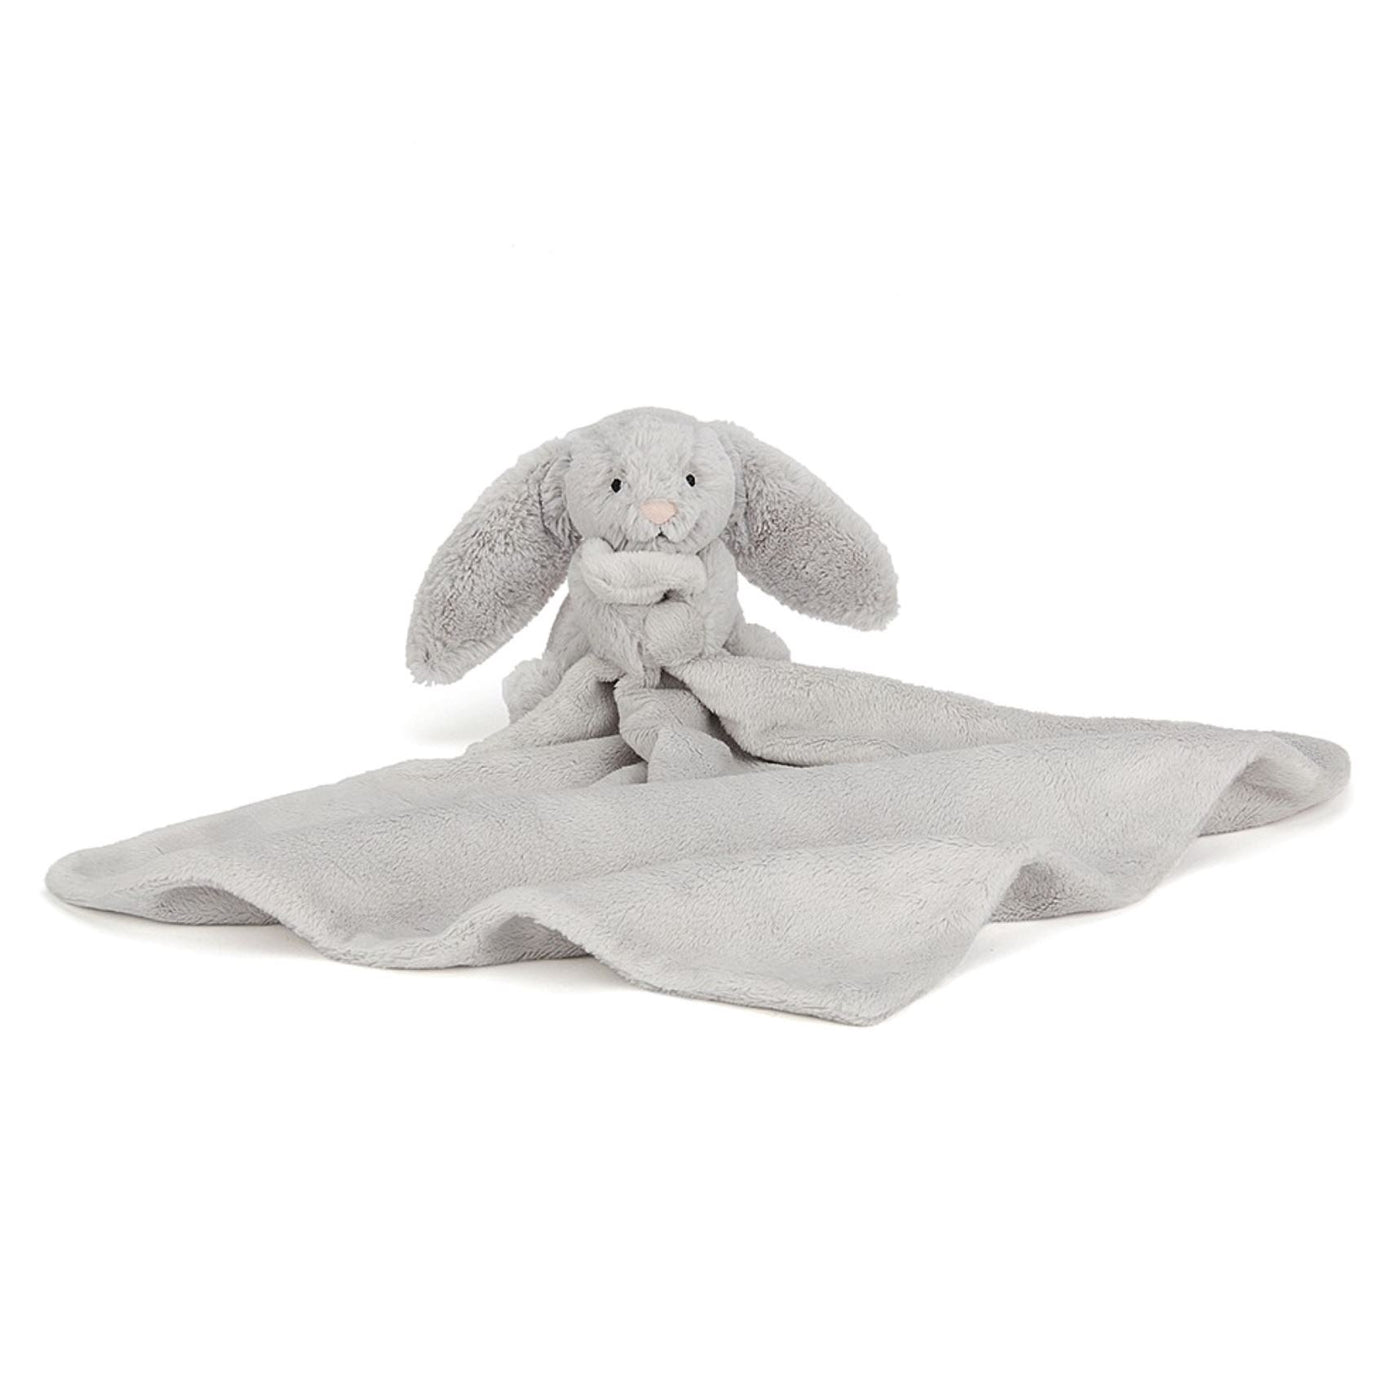 Bashful Silver Bunny Soother Soother Jellycat Australia